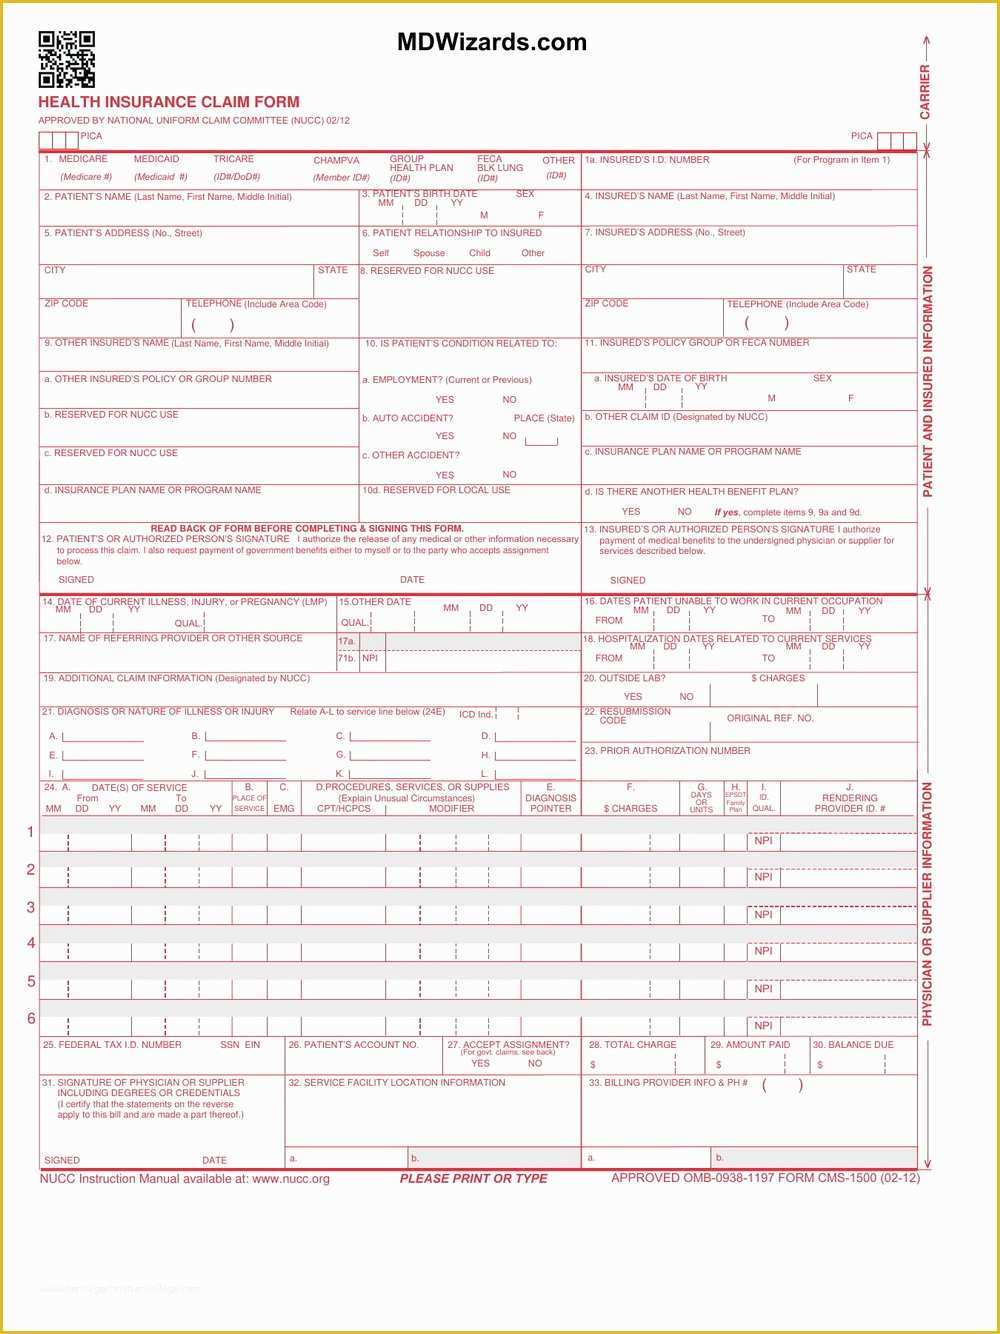 Free Cms 1500 Template for Word Of Hcfa 1500 form Template